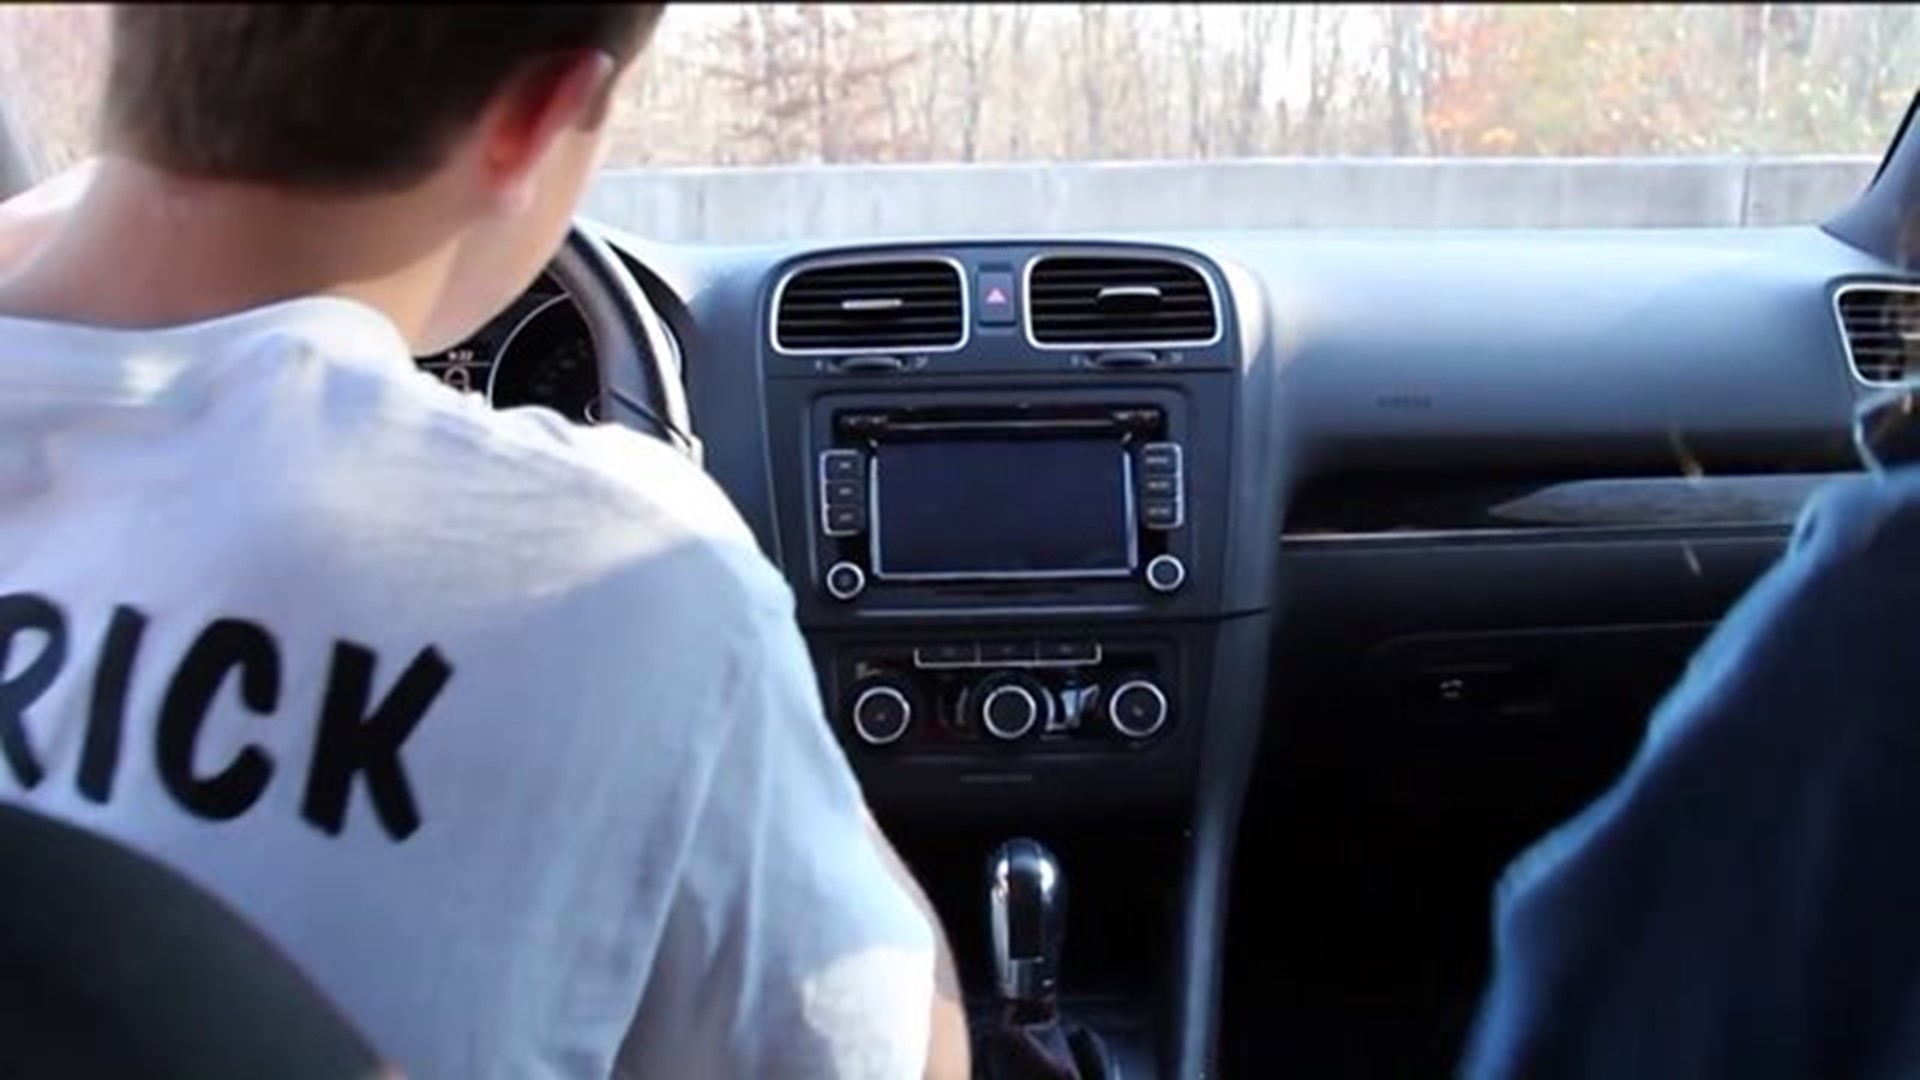 Teens promote driving safety in video series